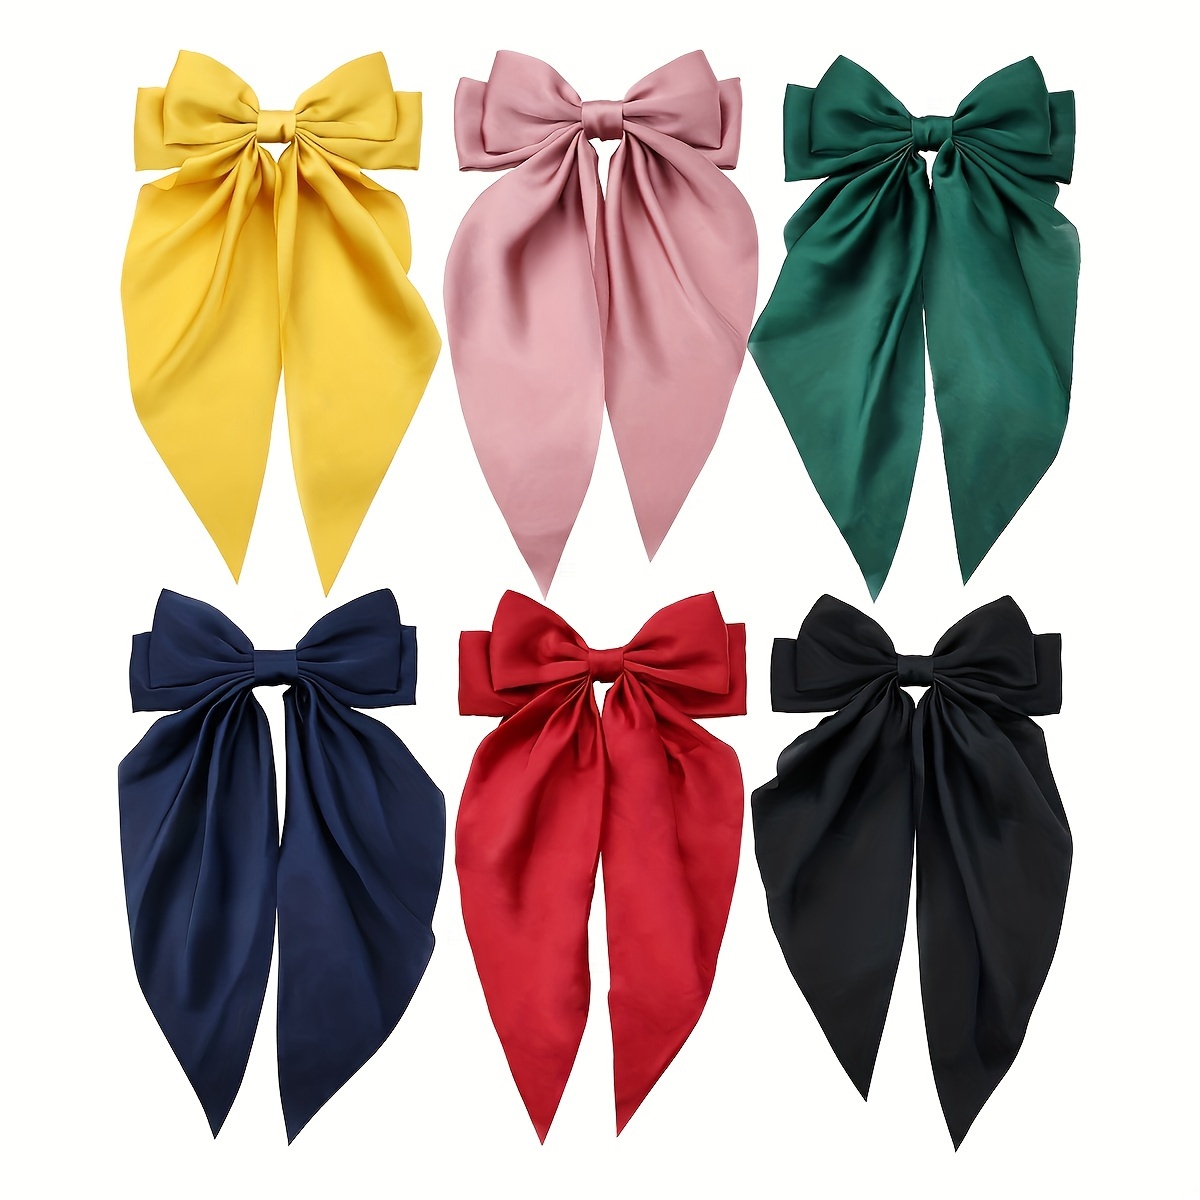 

6 Sets Of Satin Bow Hair Clips, Retro Oversized Solid Color Long Style Ribbon, Back Spoon Spring Hair Clip For Women